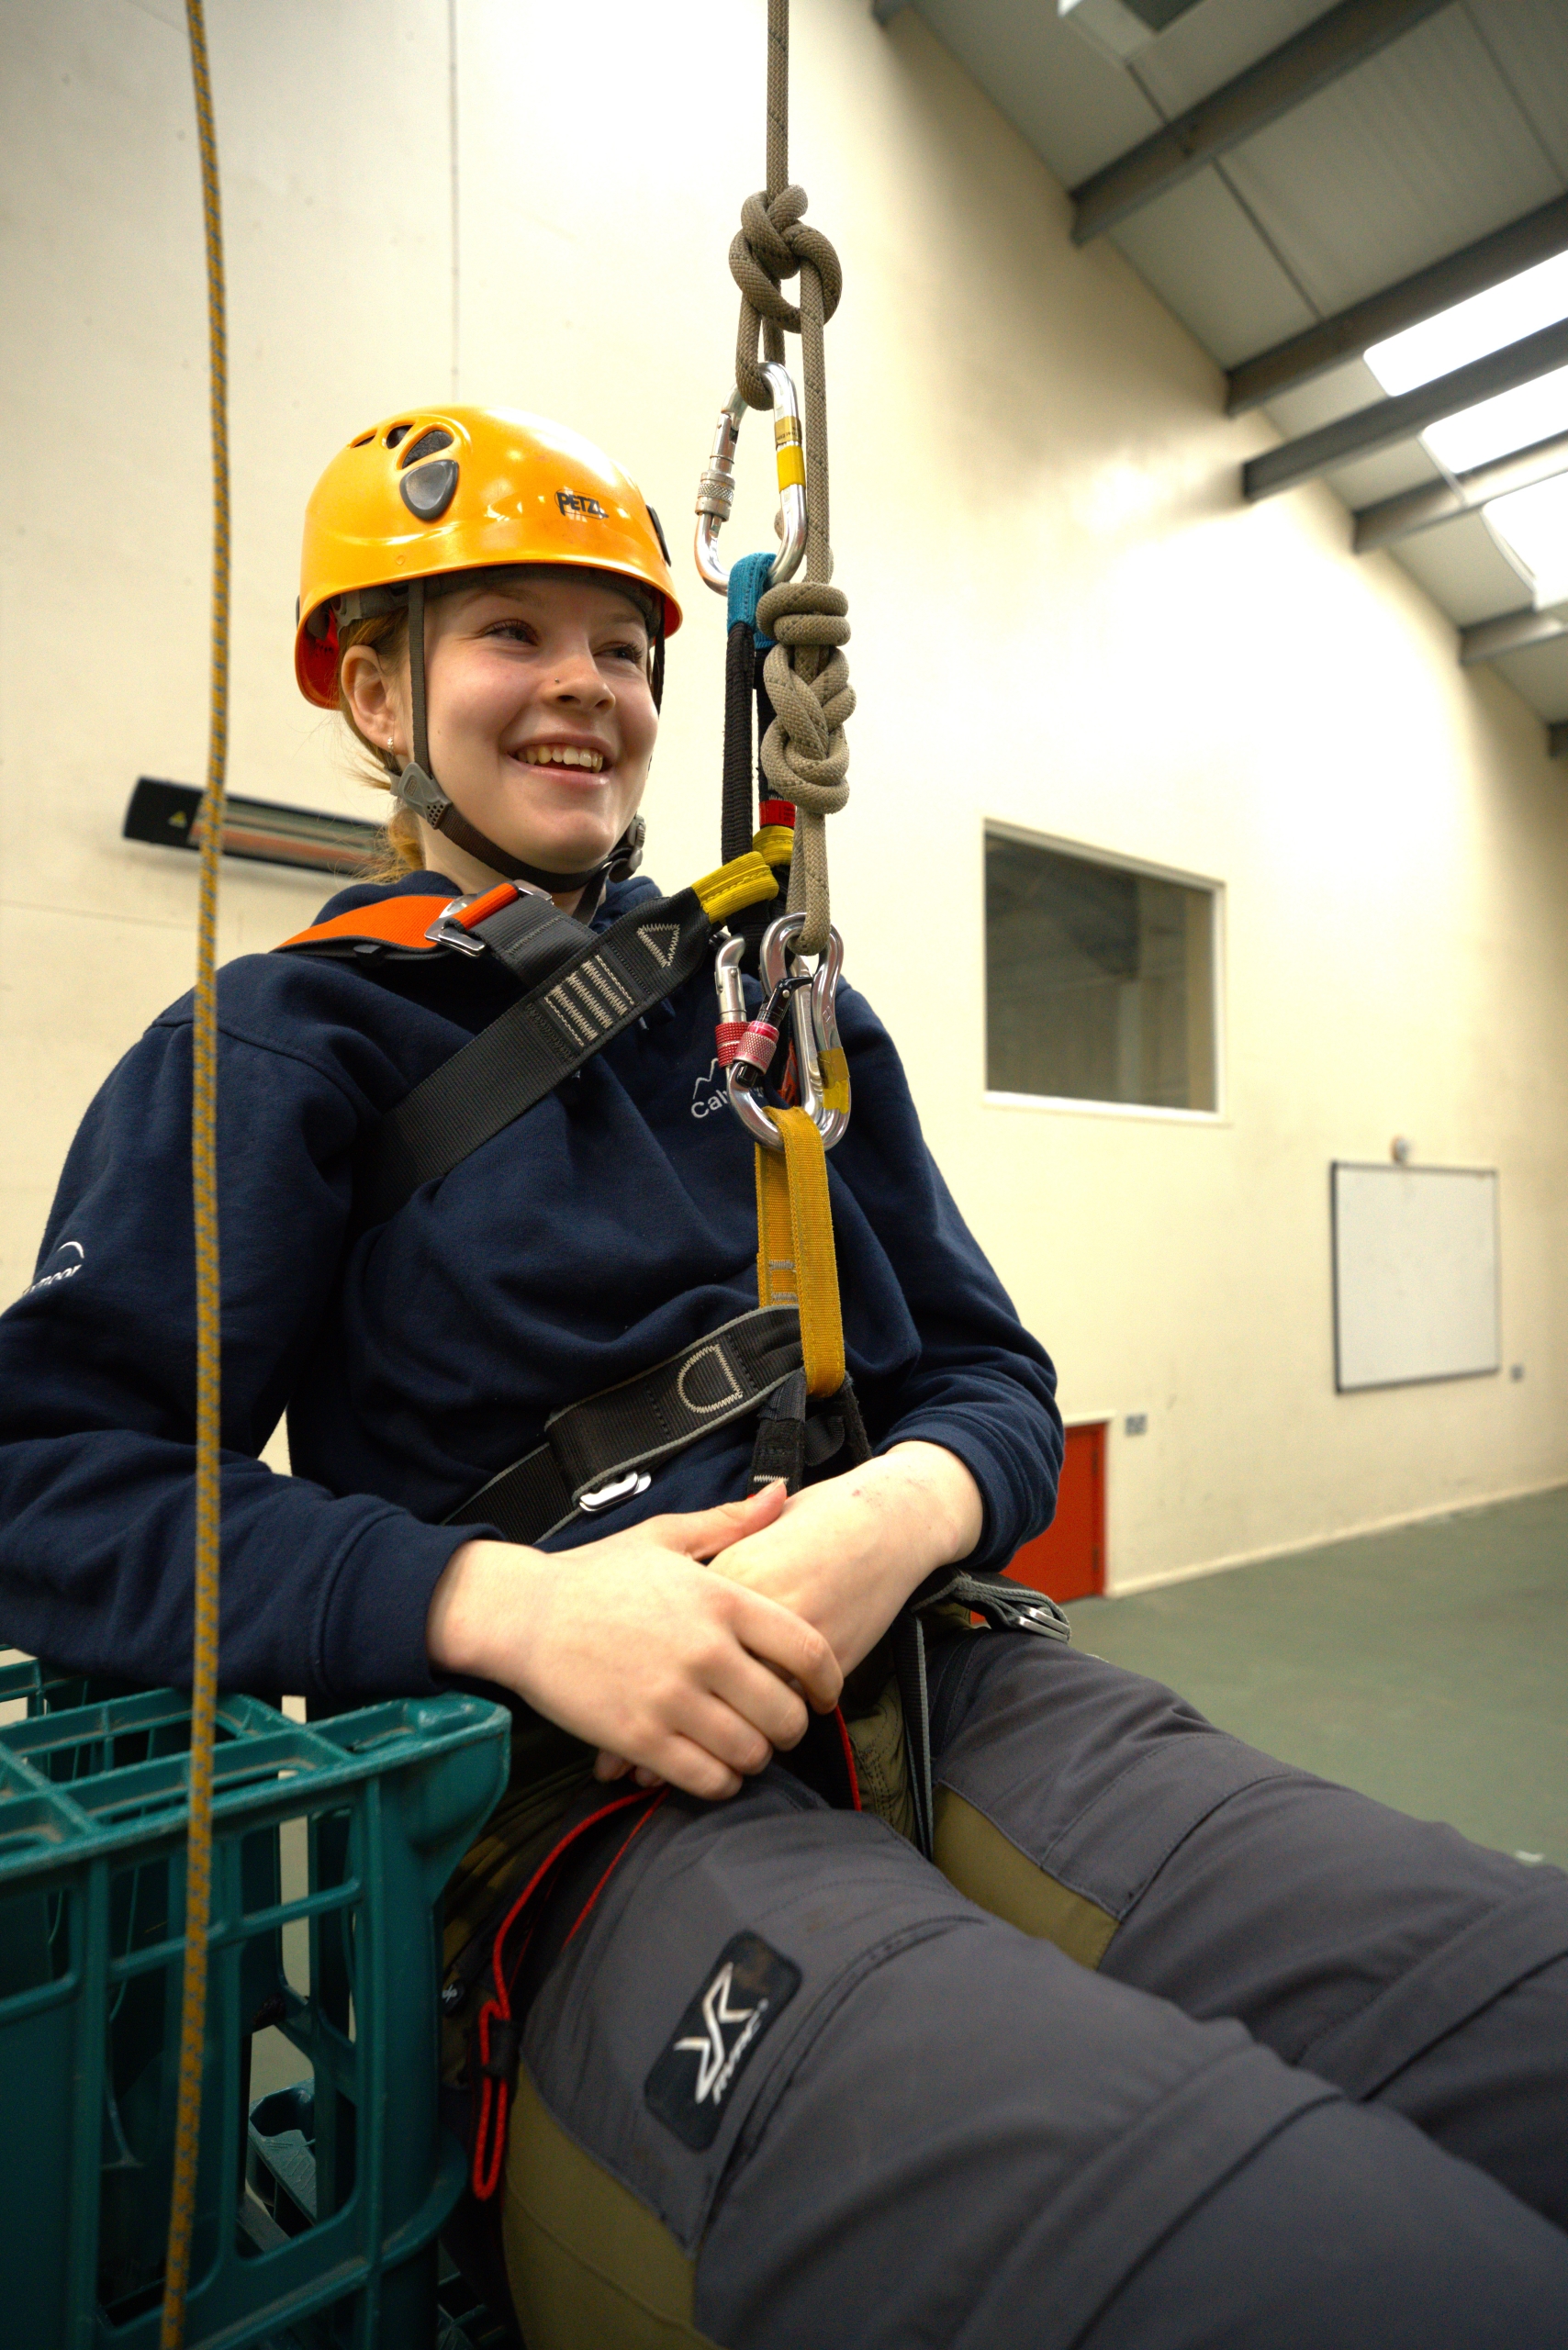 A Calvert Exmoor instructor sitting on some crates smiling, using a sit and chest harness, attached into a rope system with her hands in her lap.